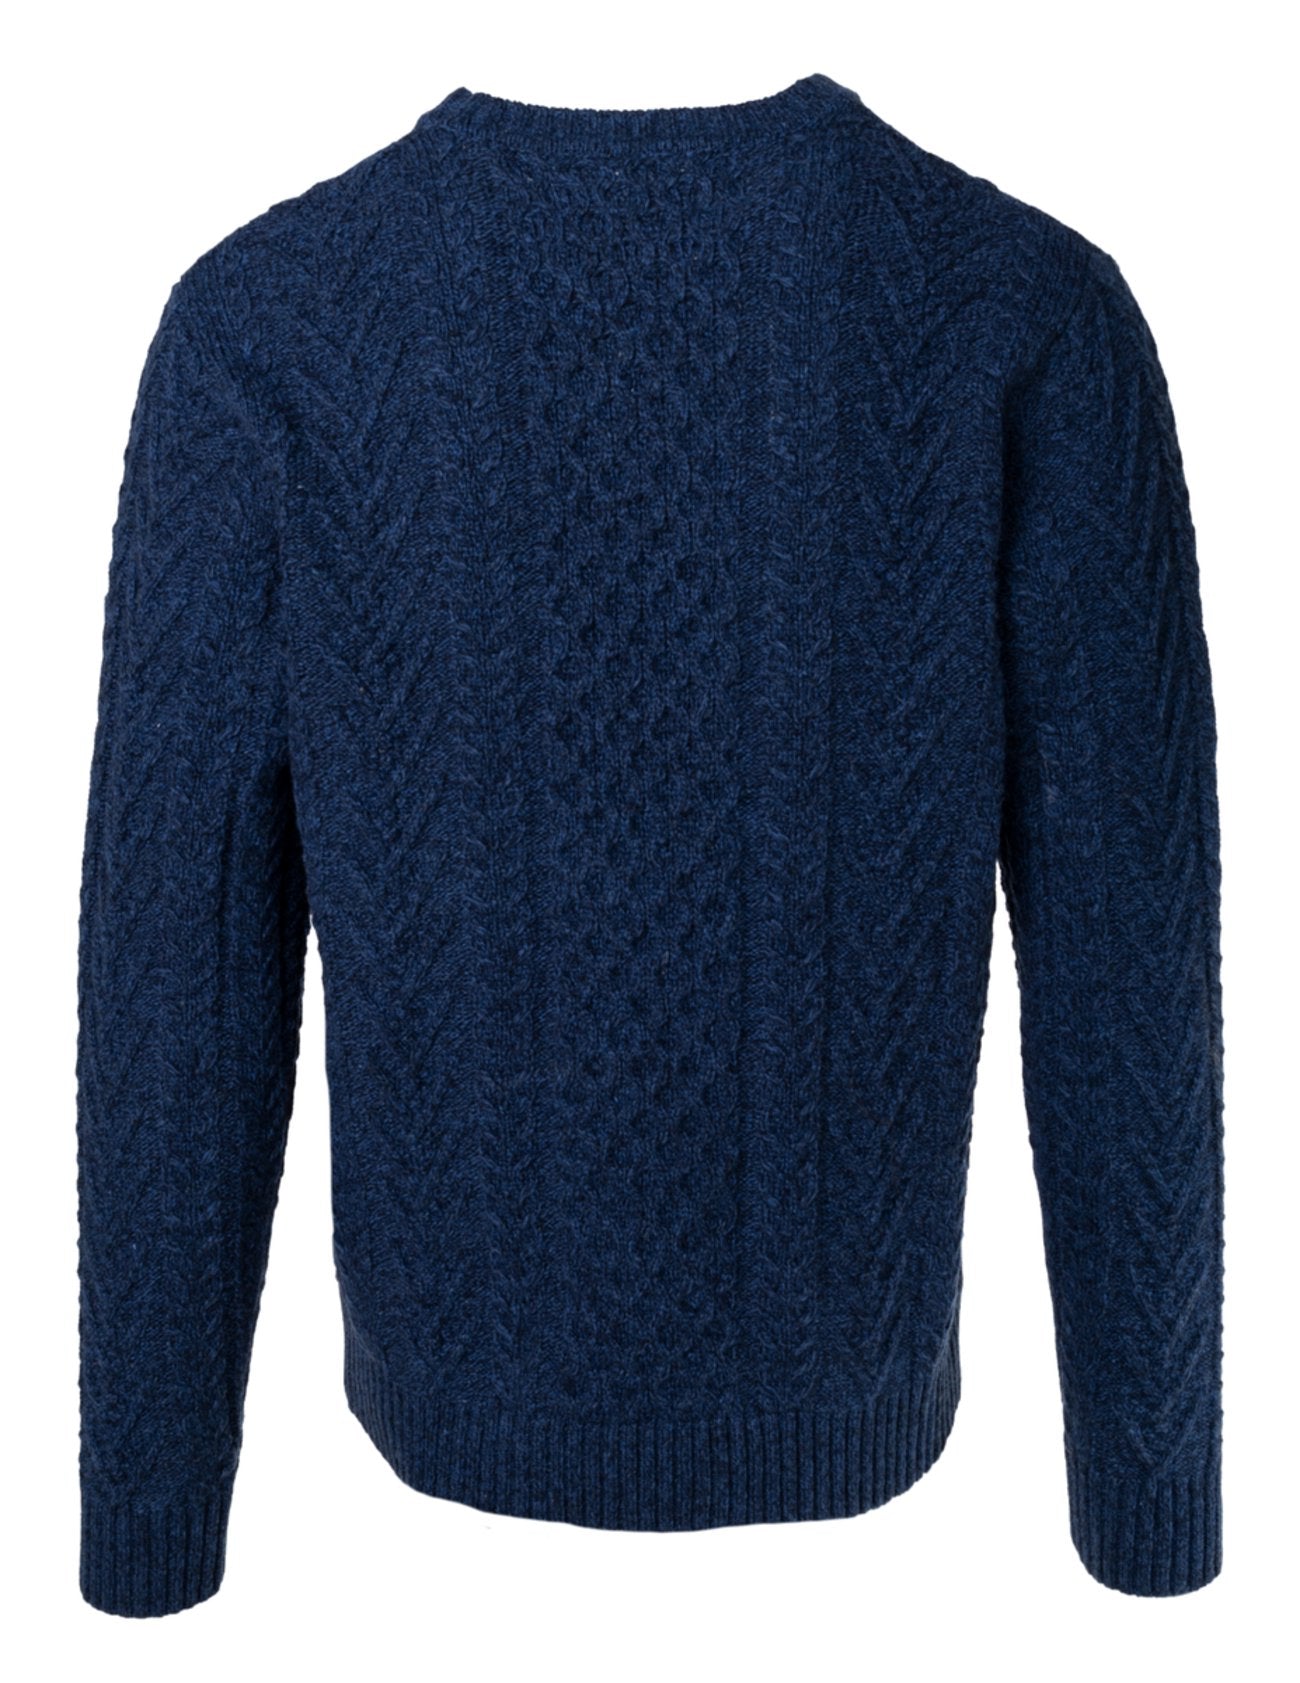 Schott NYC Midweight Wool Cable Knit Crew Neck Sweater